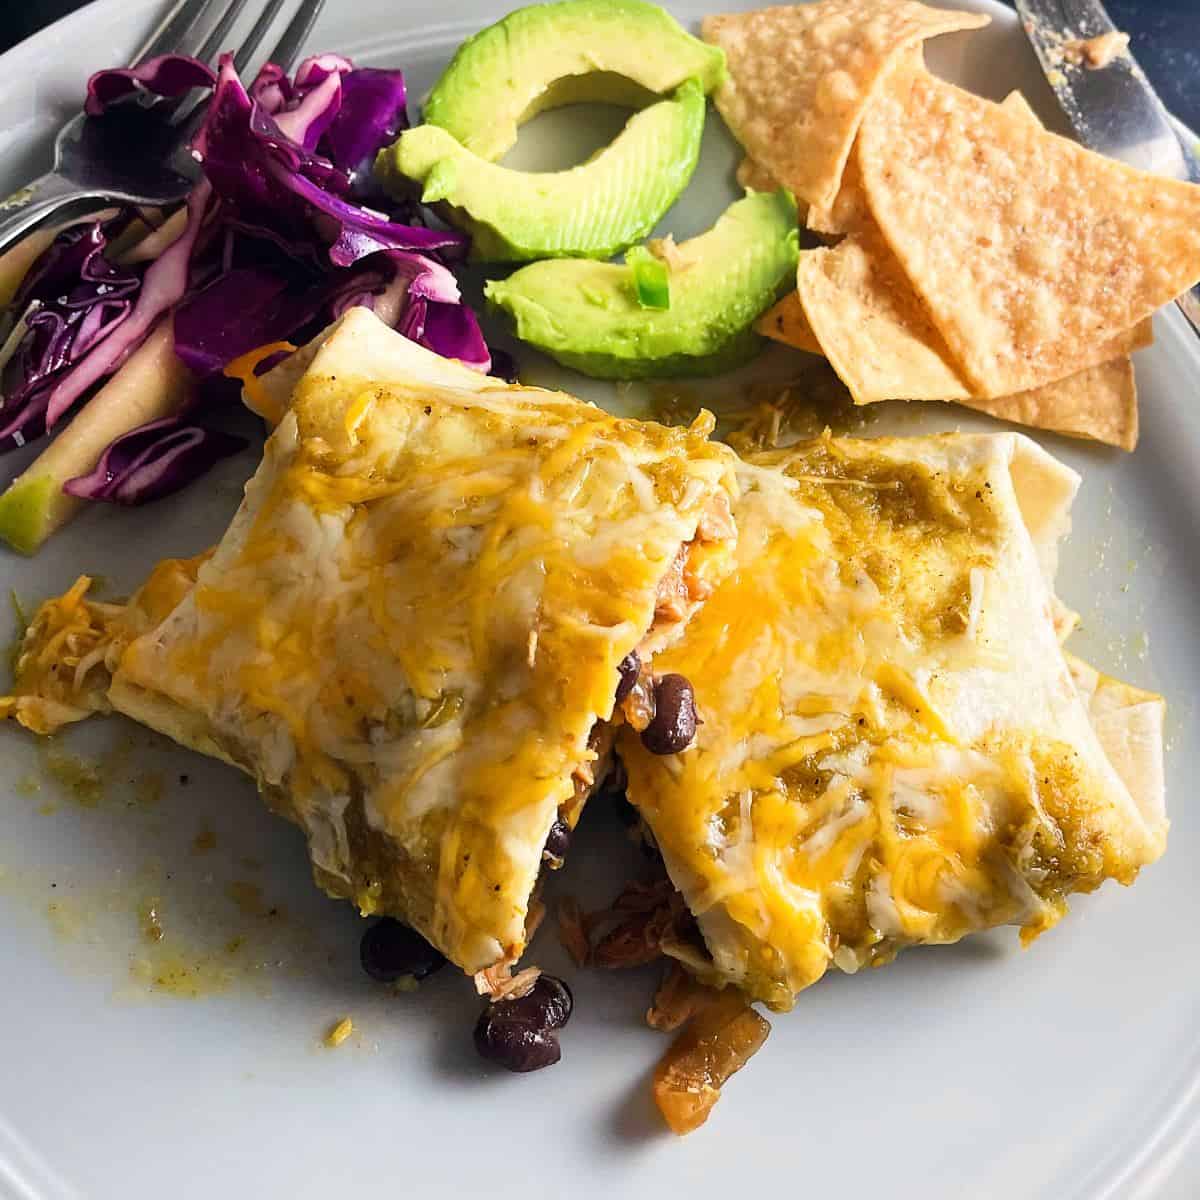 chicken and black bean enchiladas served on a plate with red cabbage, avocado slices and tortilla chips.